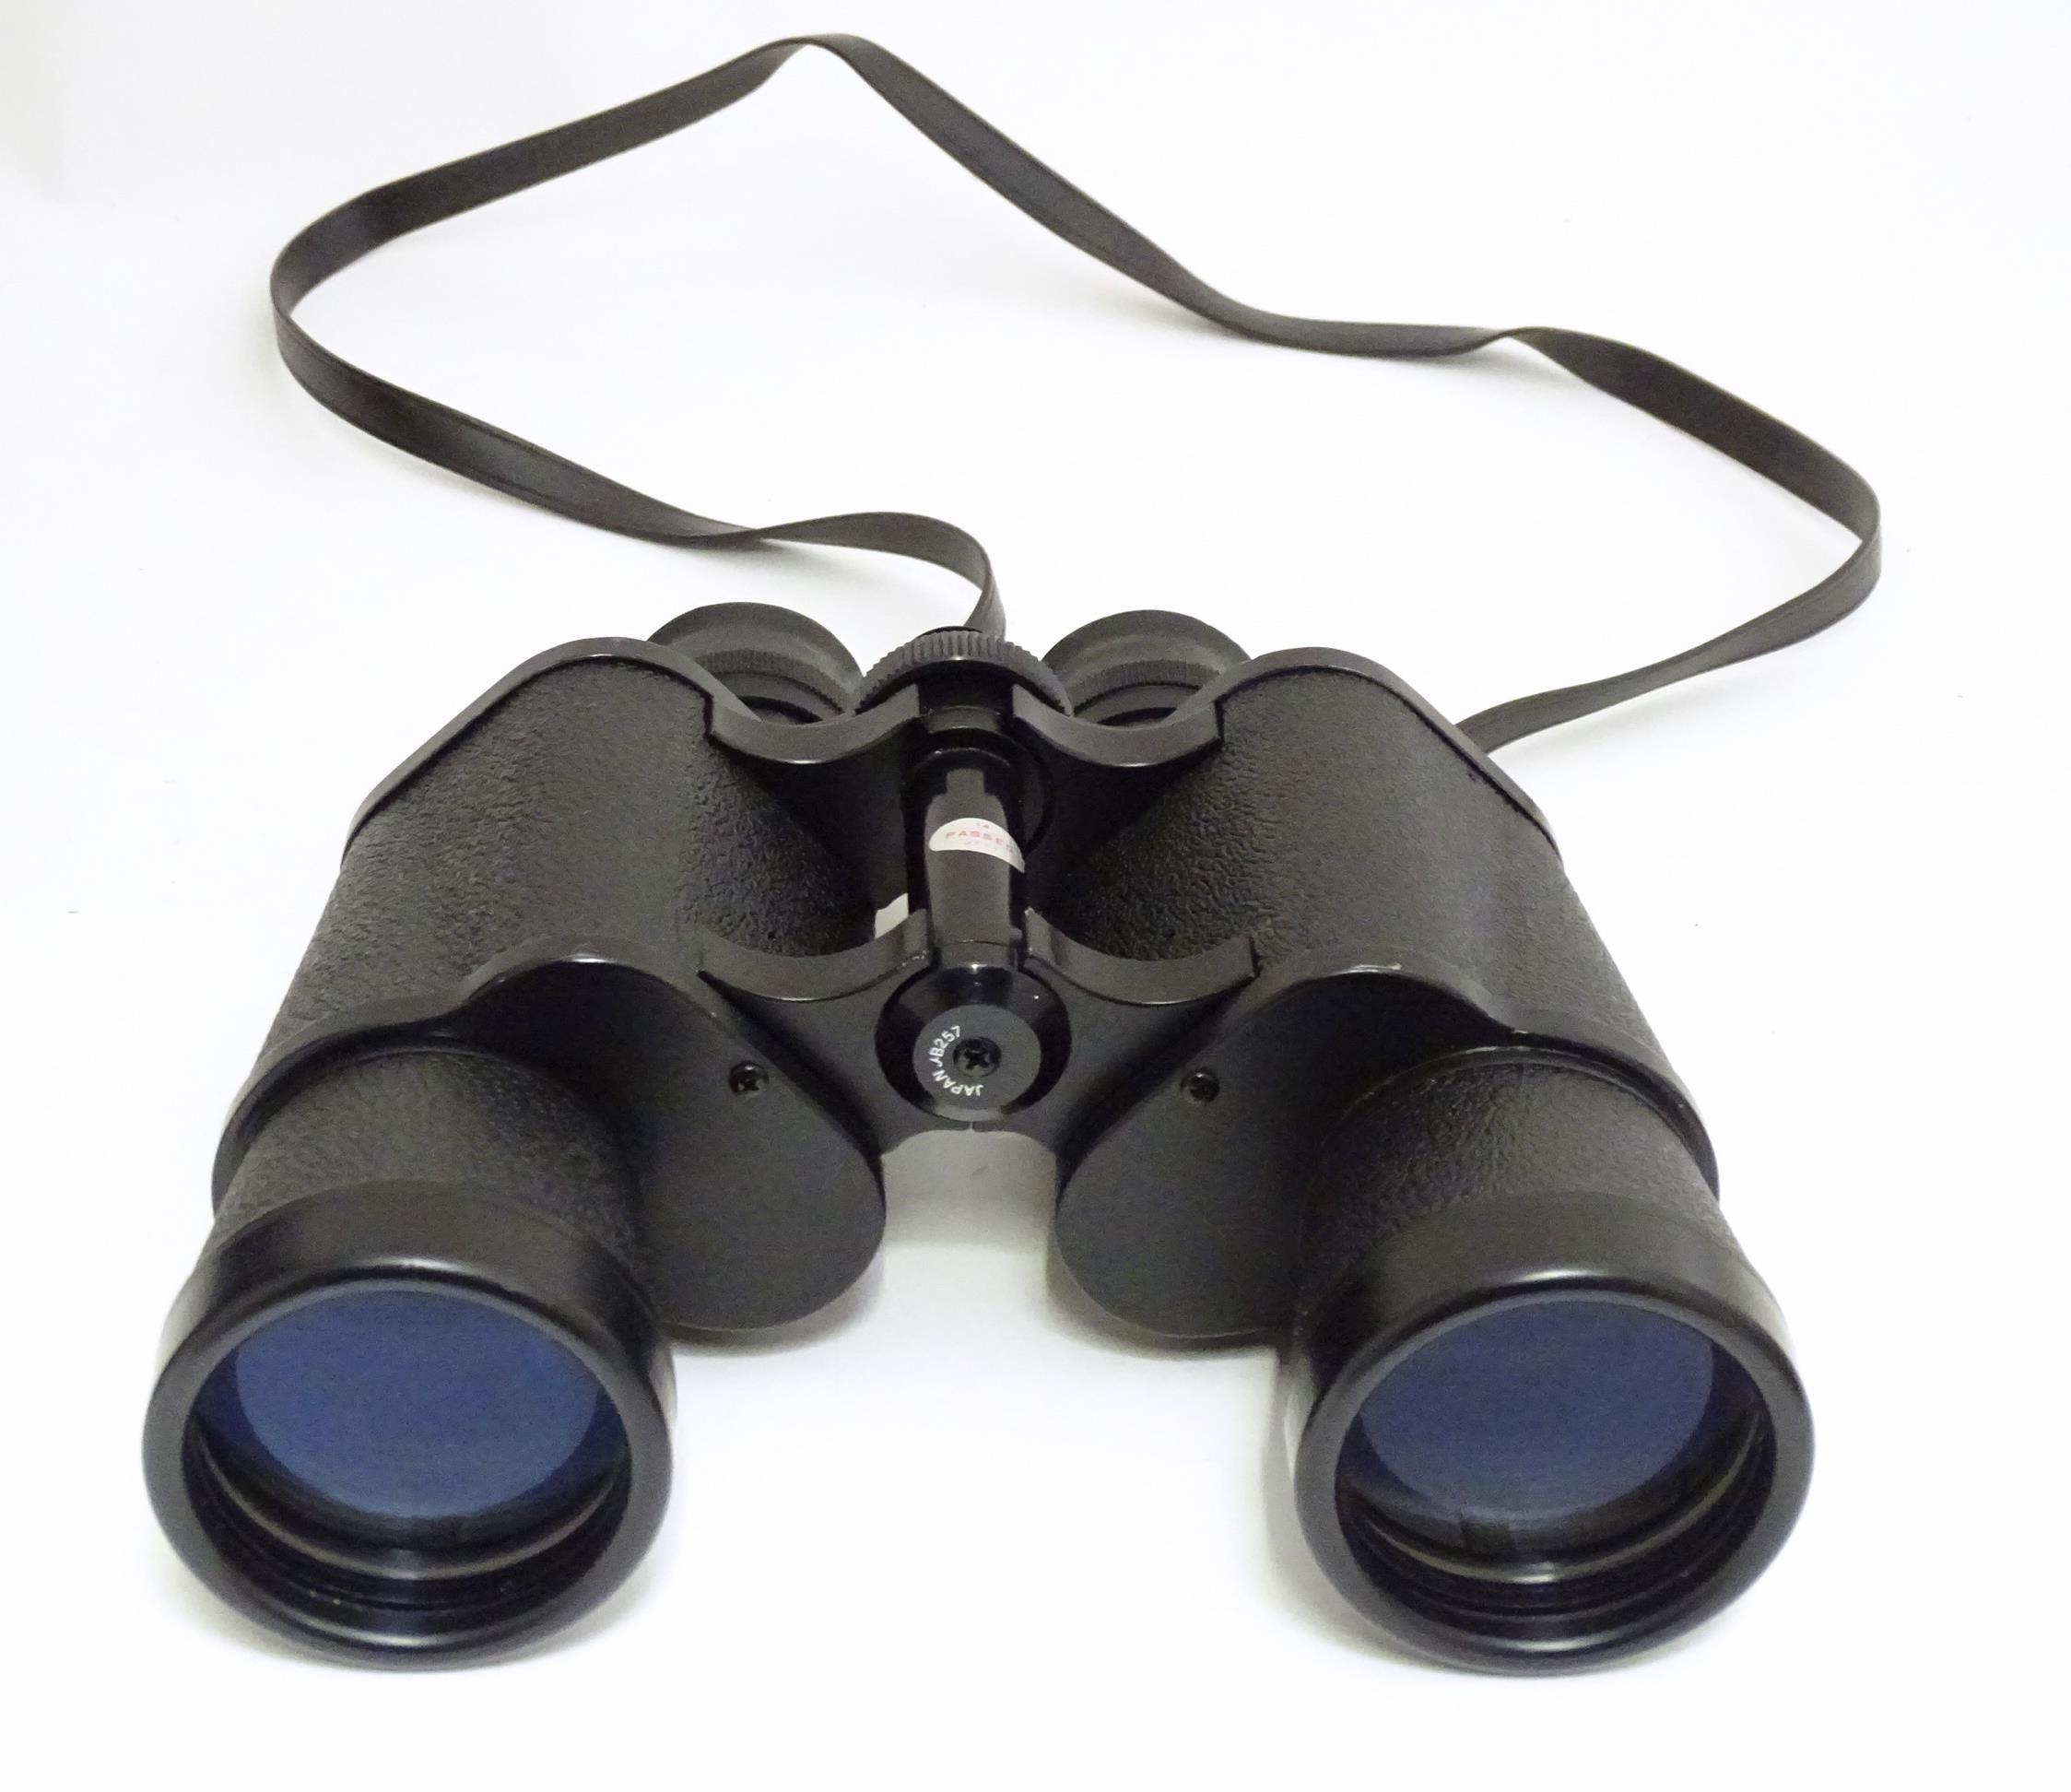 Tasco Binoculars 306,no.1026 Please Note - we do not make reference to the condition of lots - Image 4 of 6